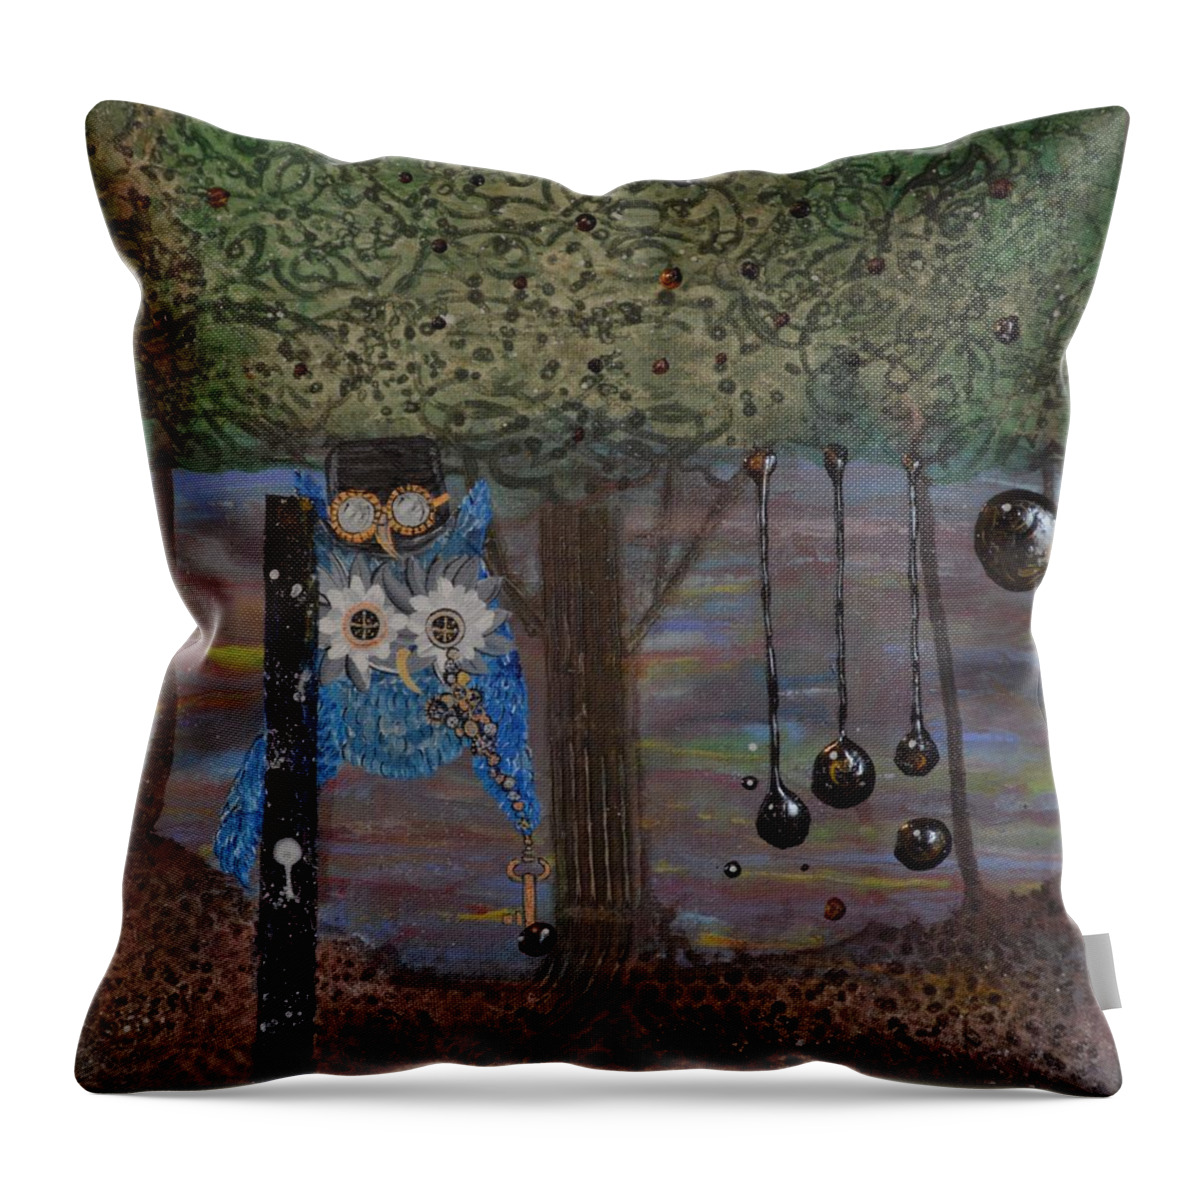 Steampunk Throw Pillow featuring the painting Hoopunked Steampunked No. 391 by MiMi Stirn